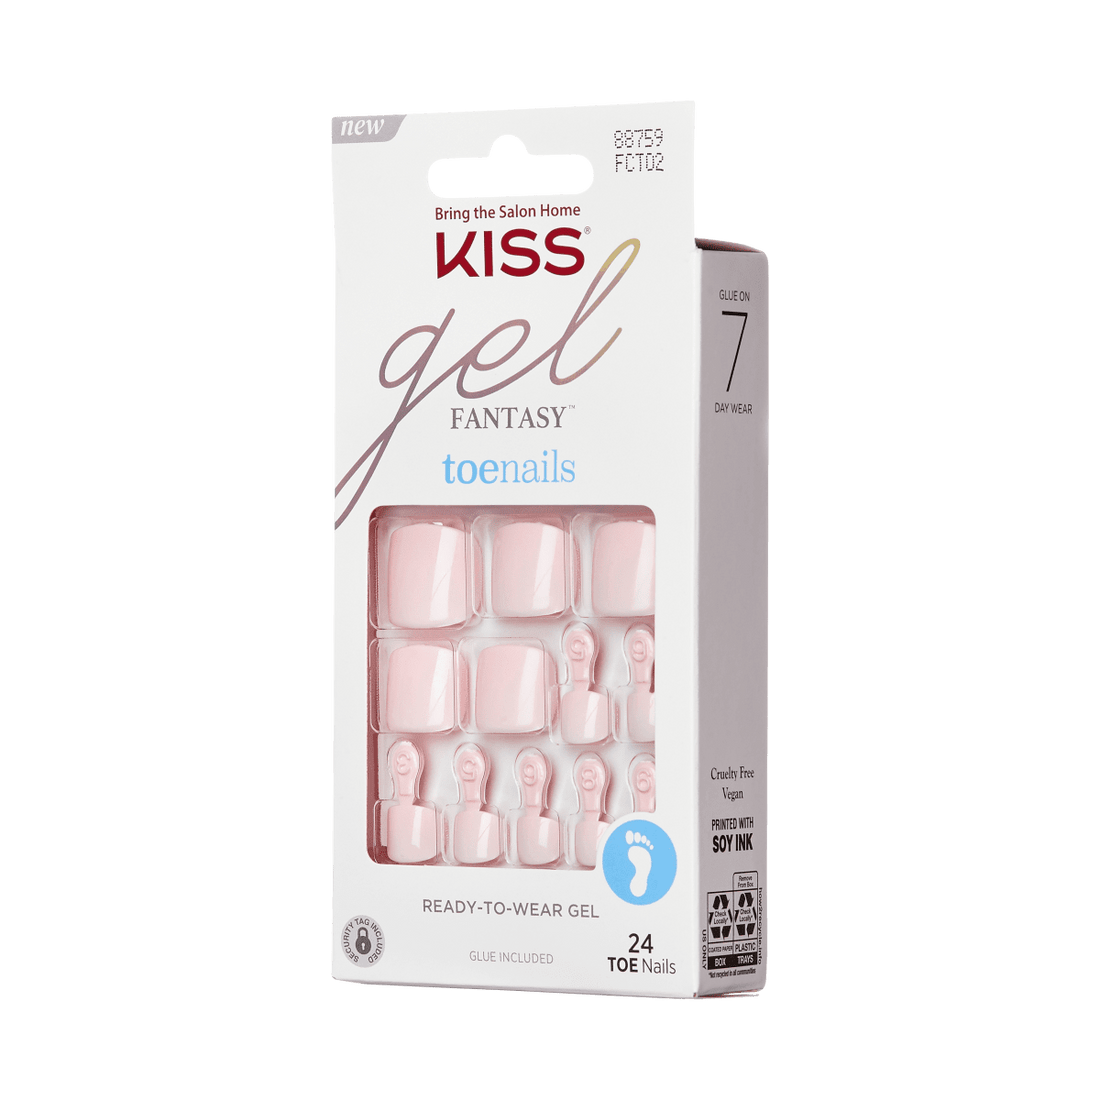 KISS Gel Fantasy, Press-On Nails, Try Everything, Pink, Short Square, 24ct